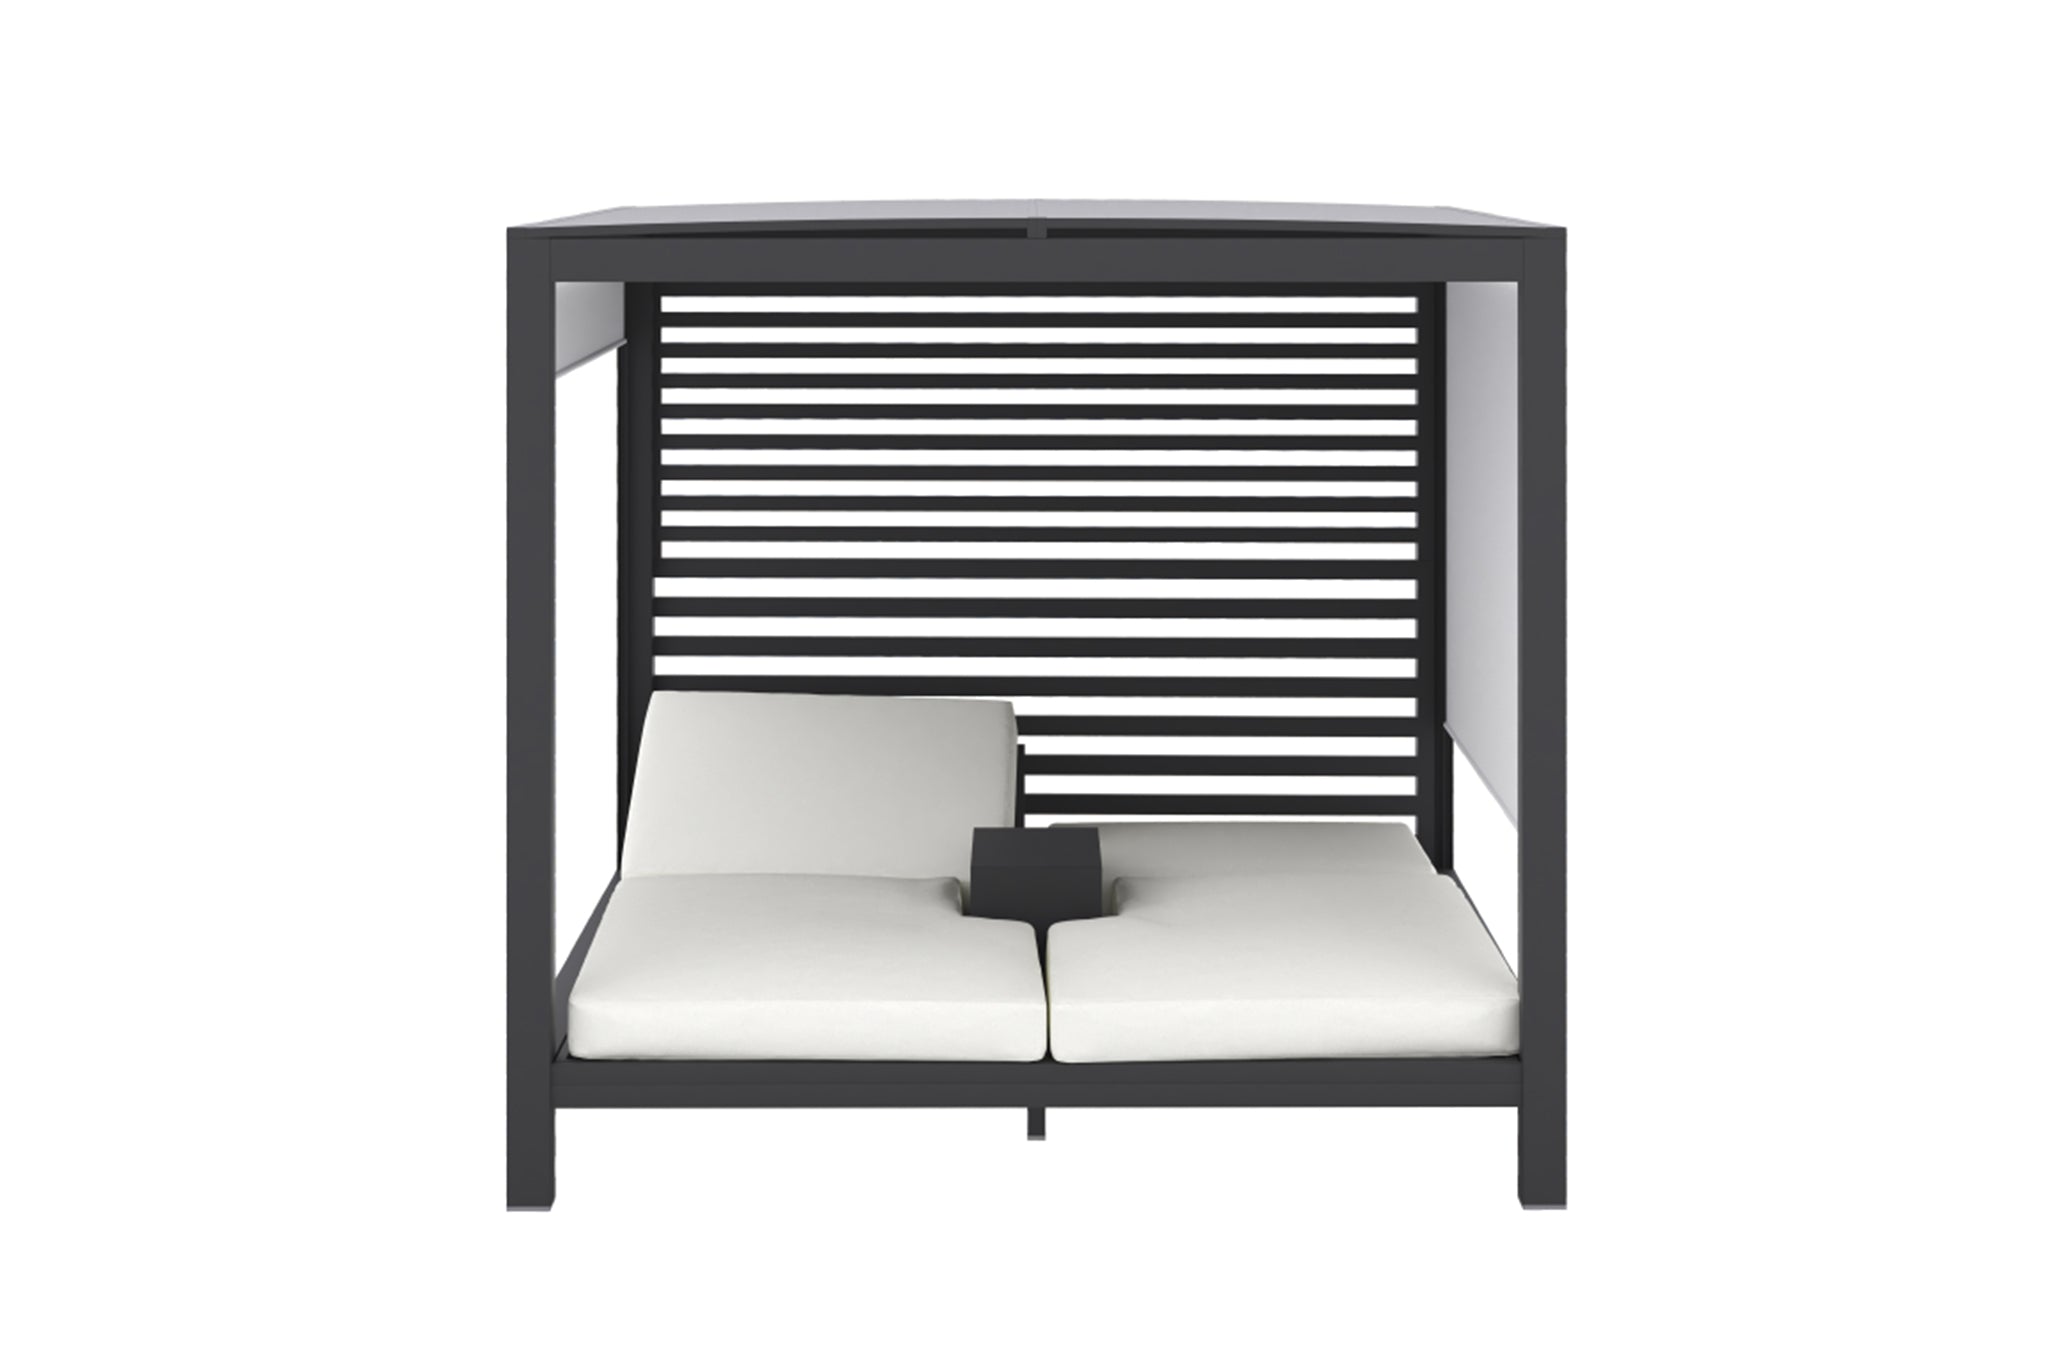 Maldives Double Daybed Villa – Asteroid Black (Charcoal)